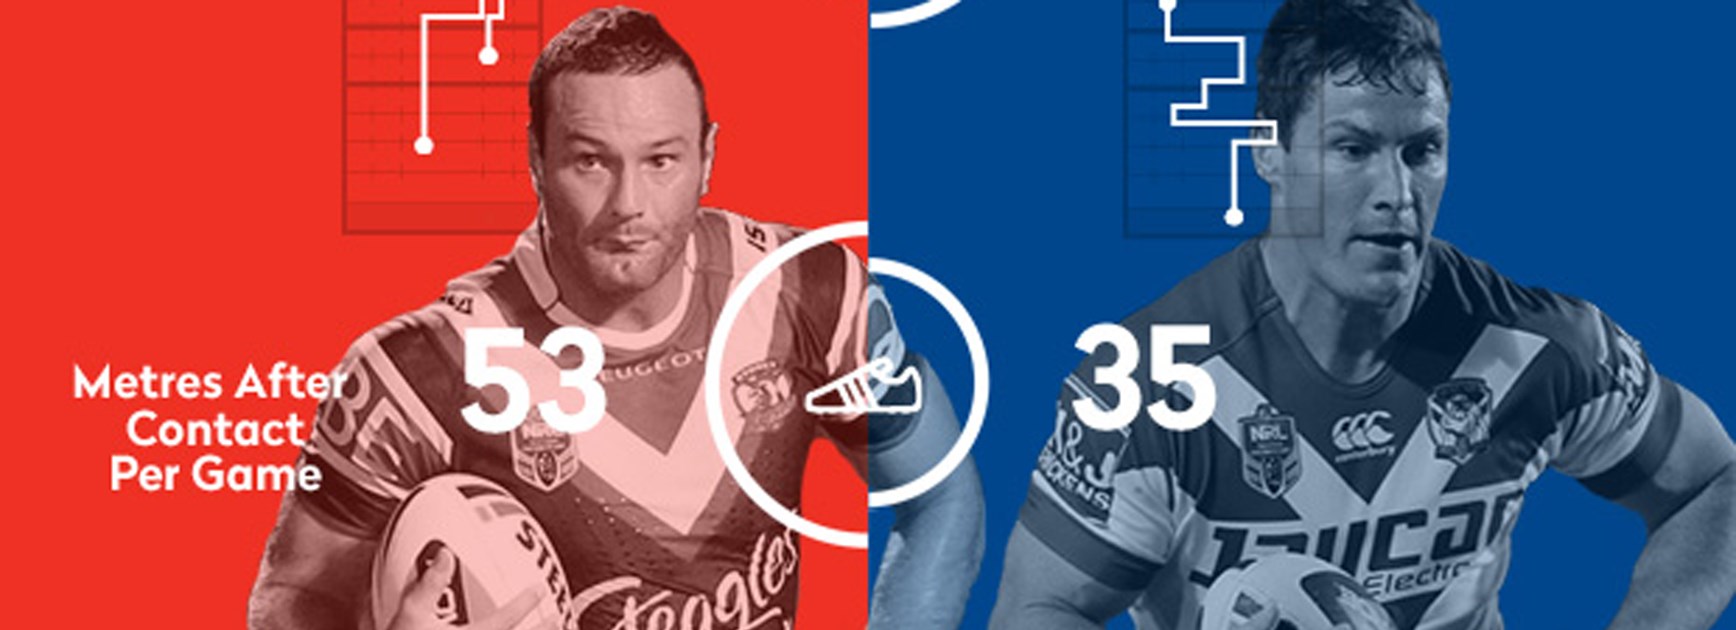 NSW teammates and key second-rowers for the Roosters and Bulldogs, Boyd Cordner and Josh Jackson.